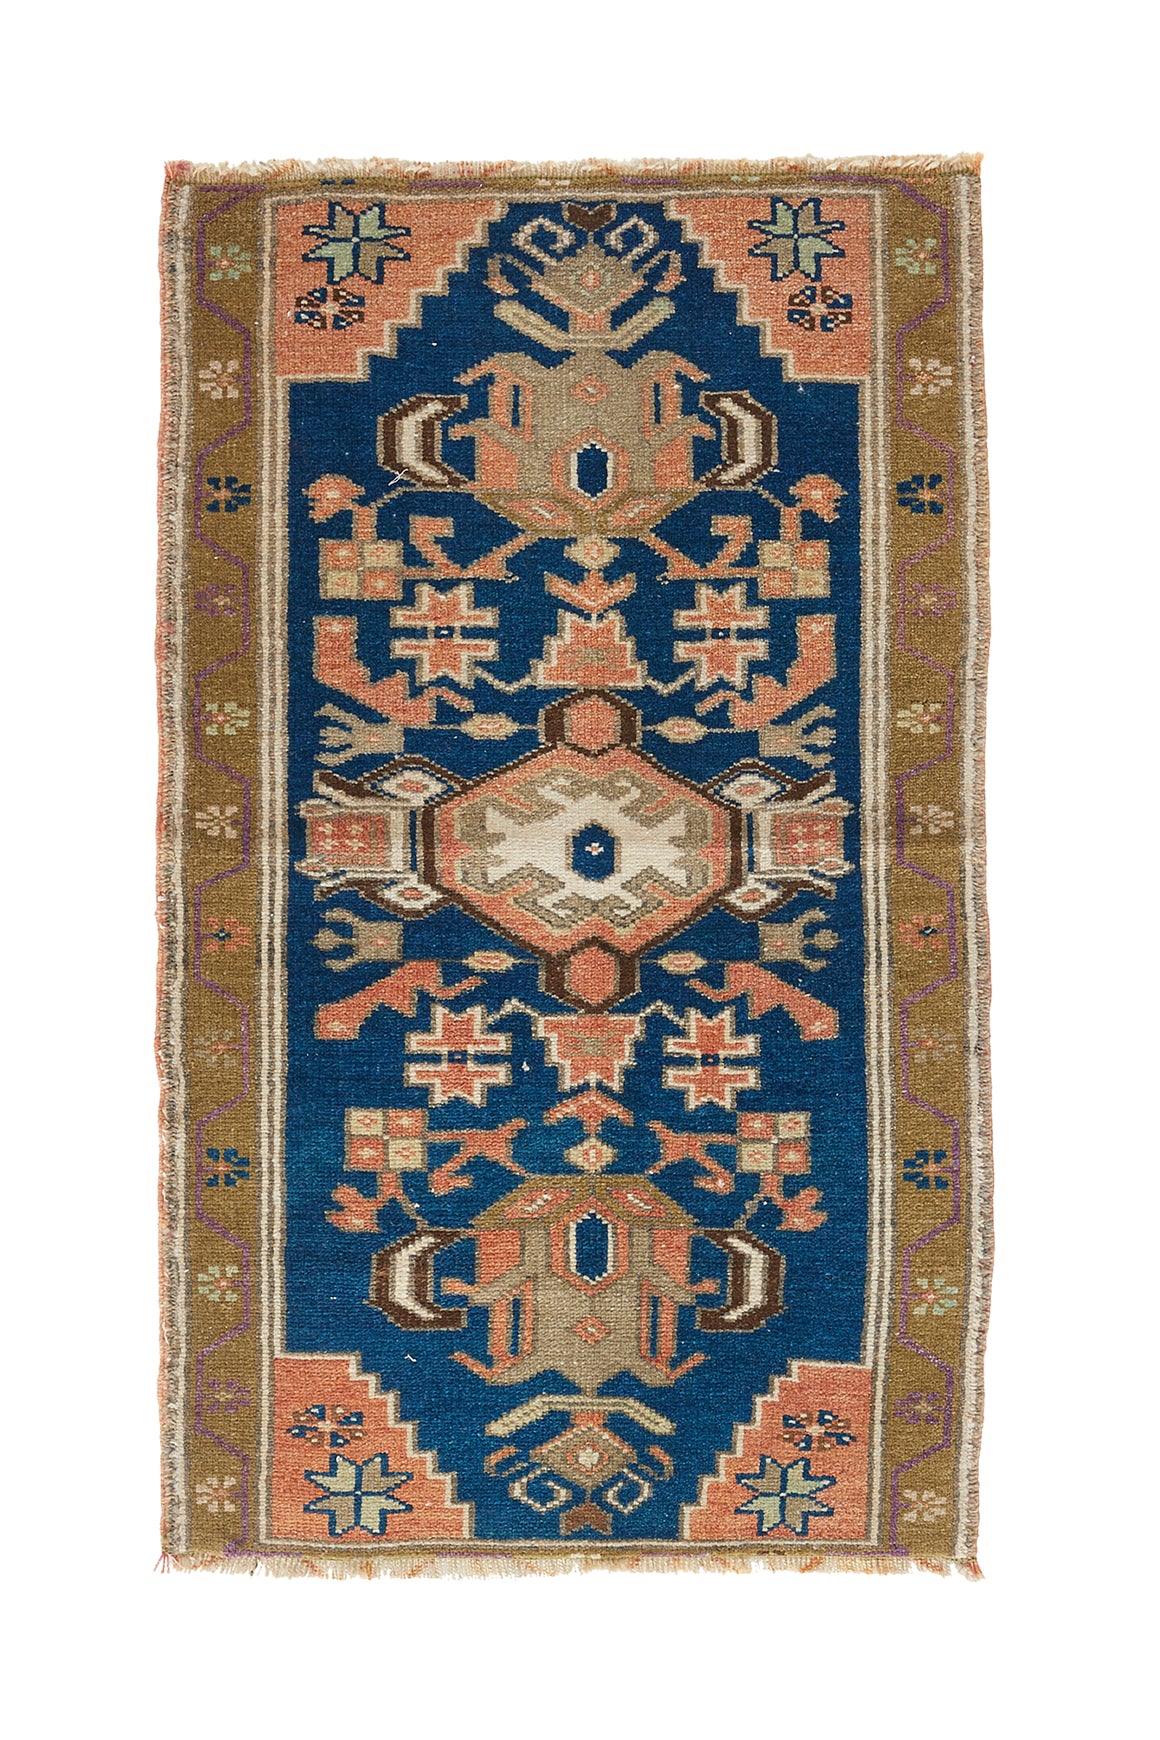 'Tiny Dancer' Vintage Persian Rug - 1'10" x 3'2" - Canary Lane - Curated Textiles